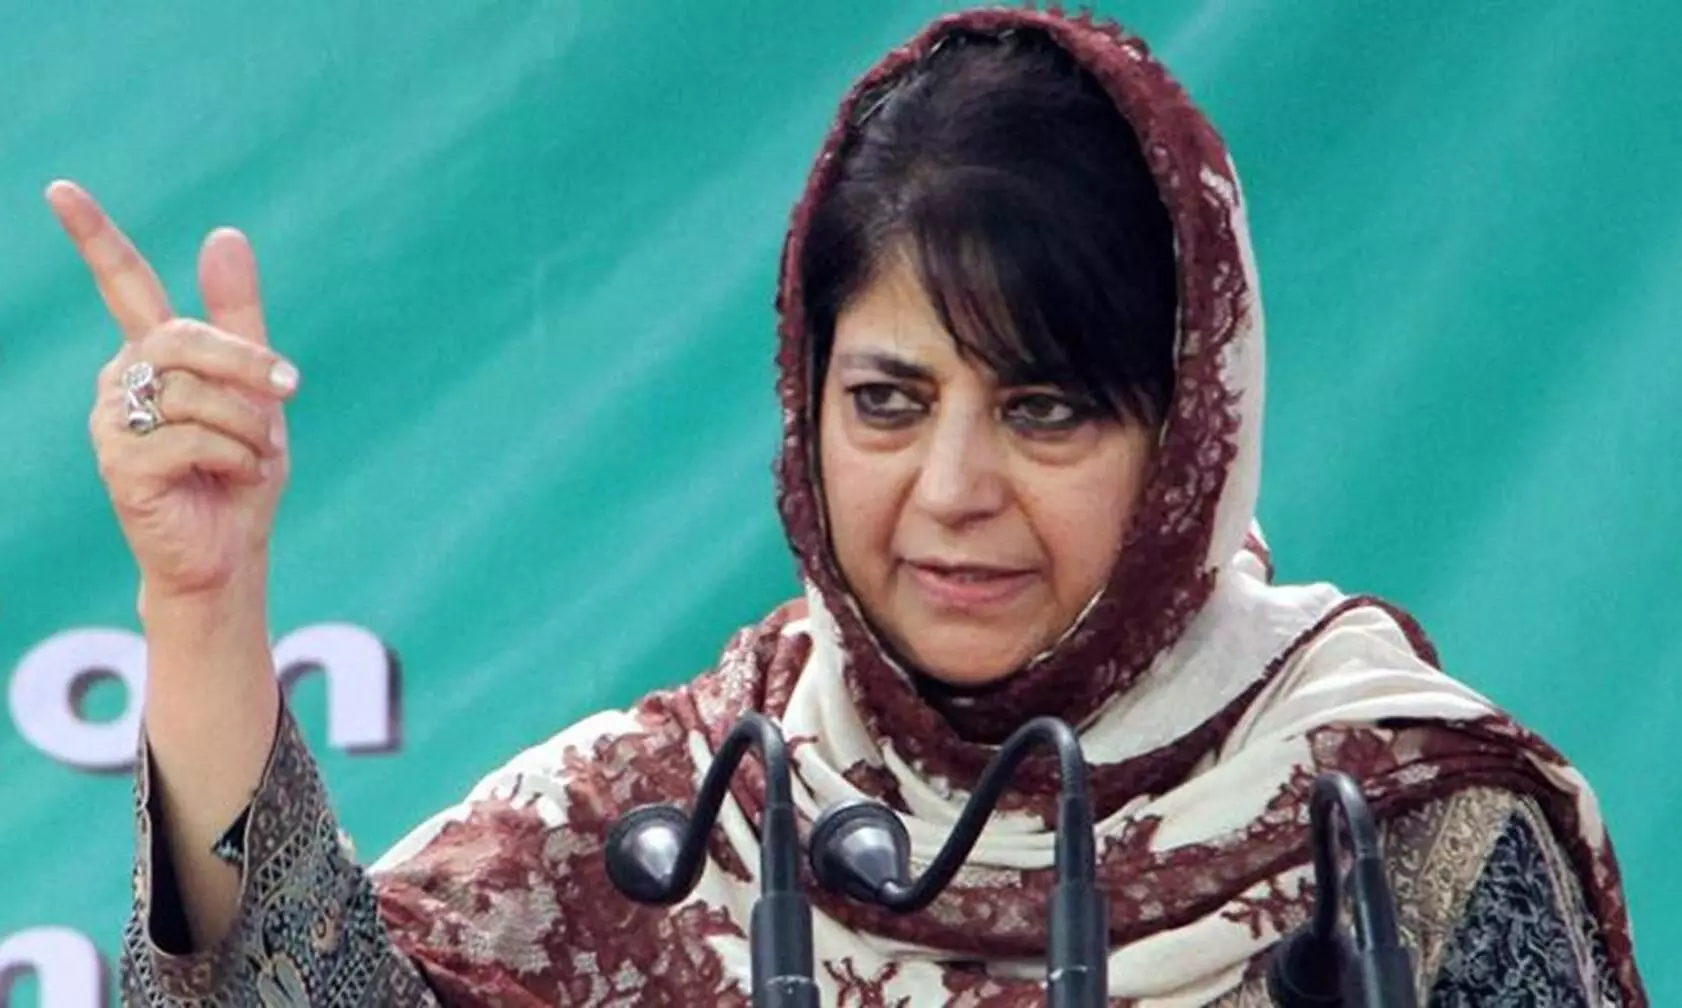 Former CM of J&K Mehbooba Mufti released from detention after 14 months.